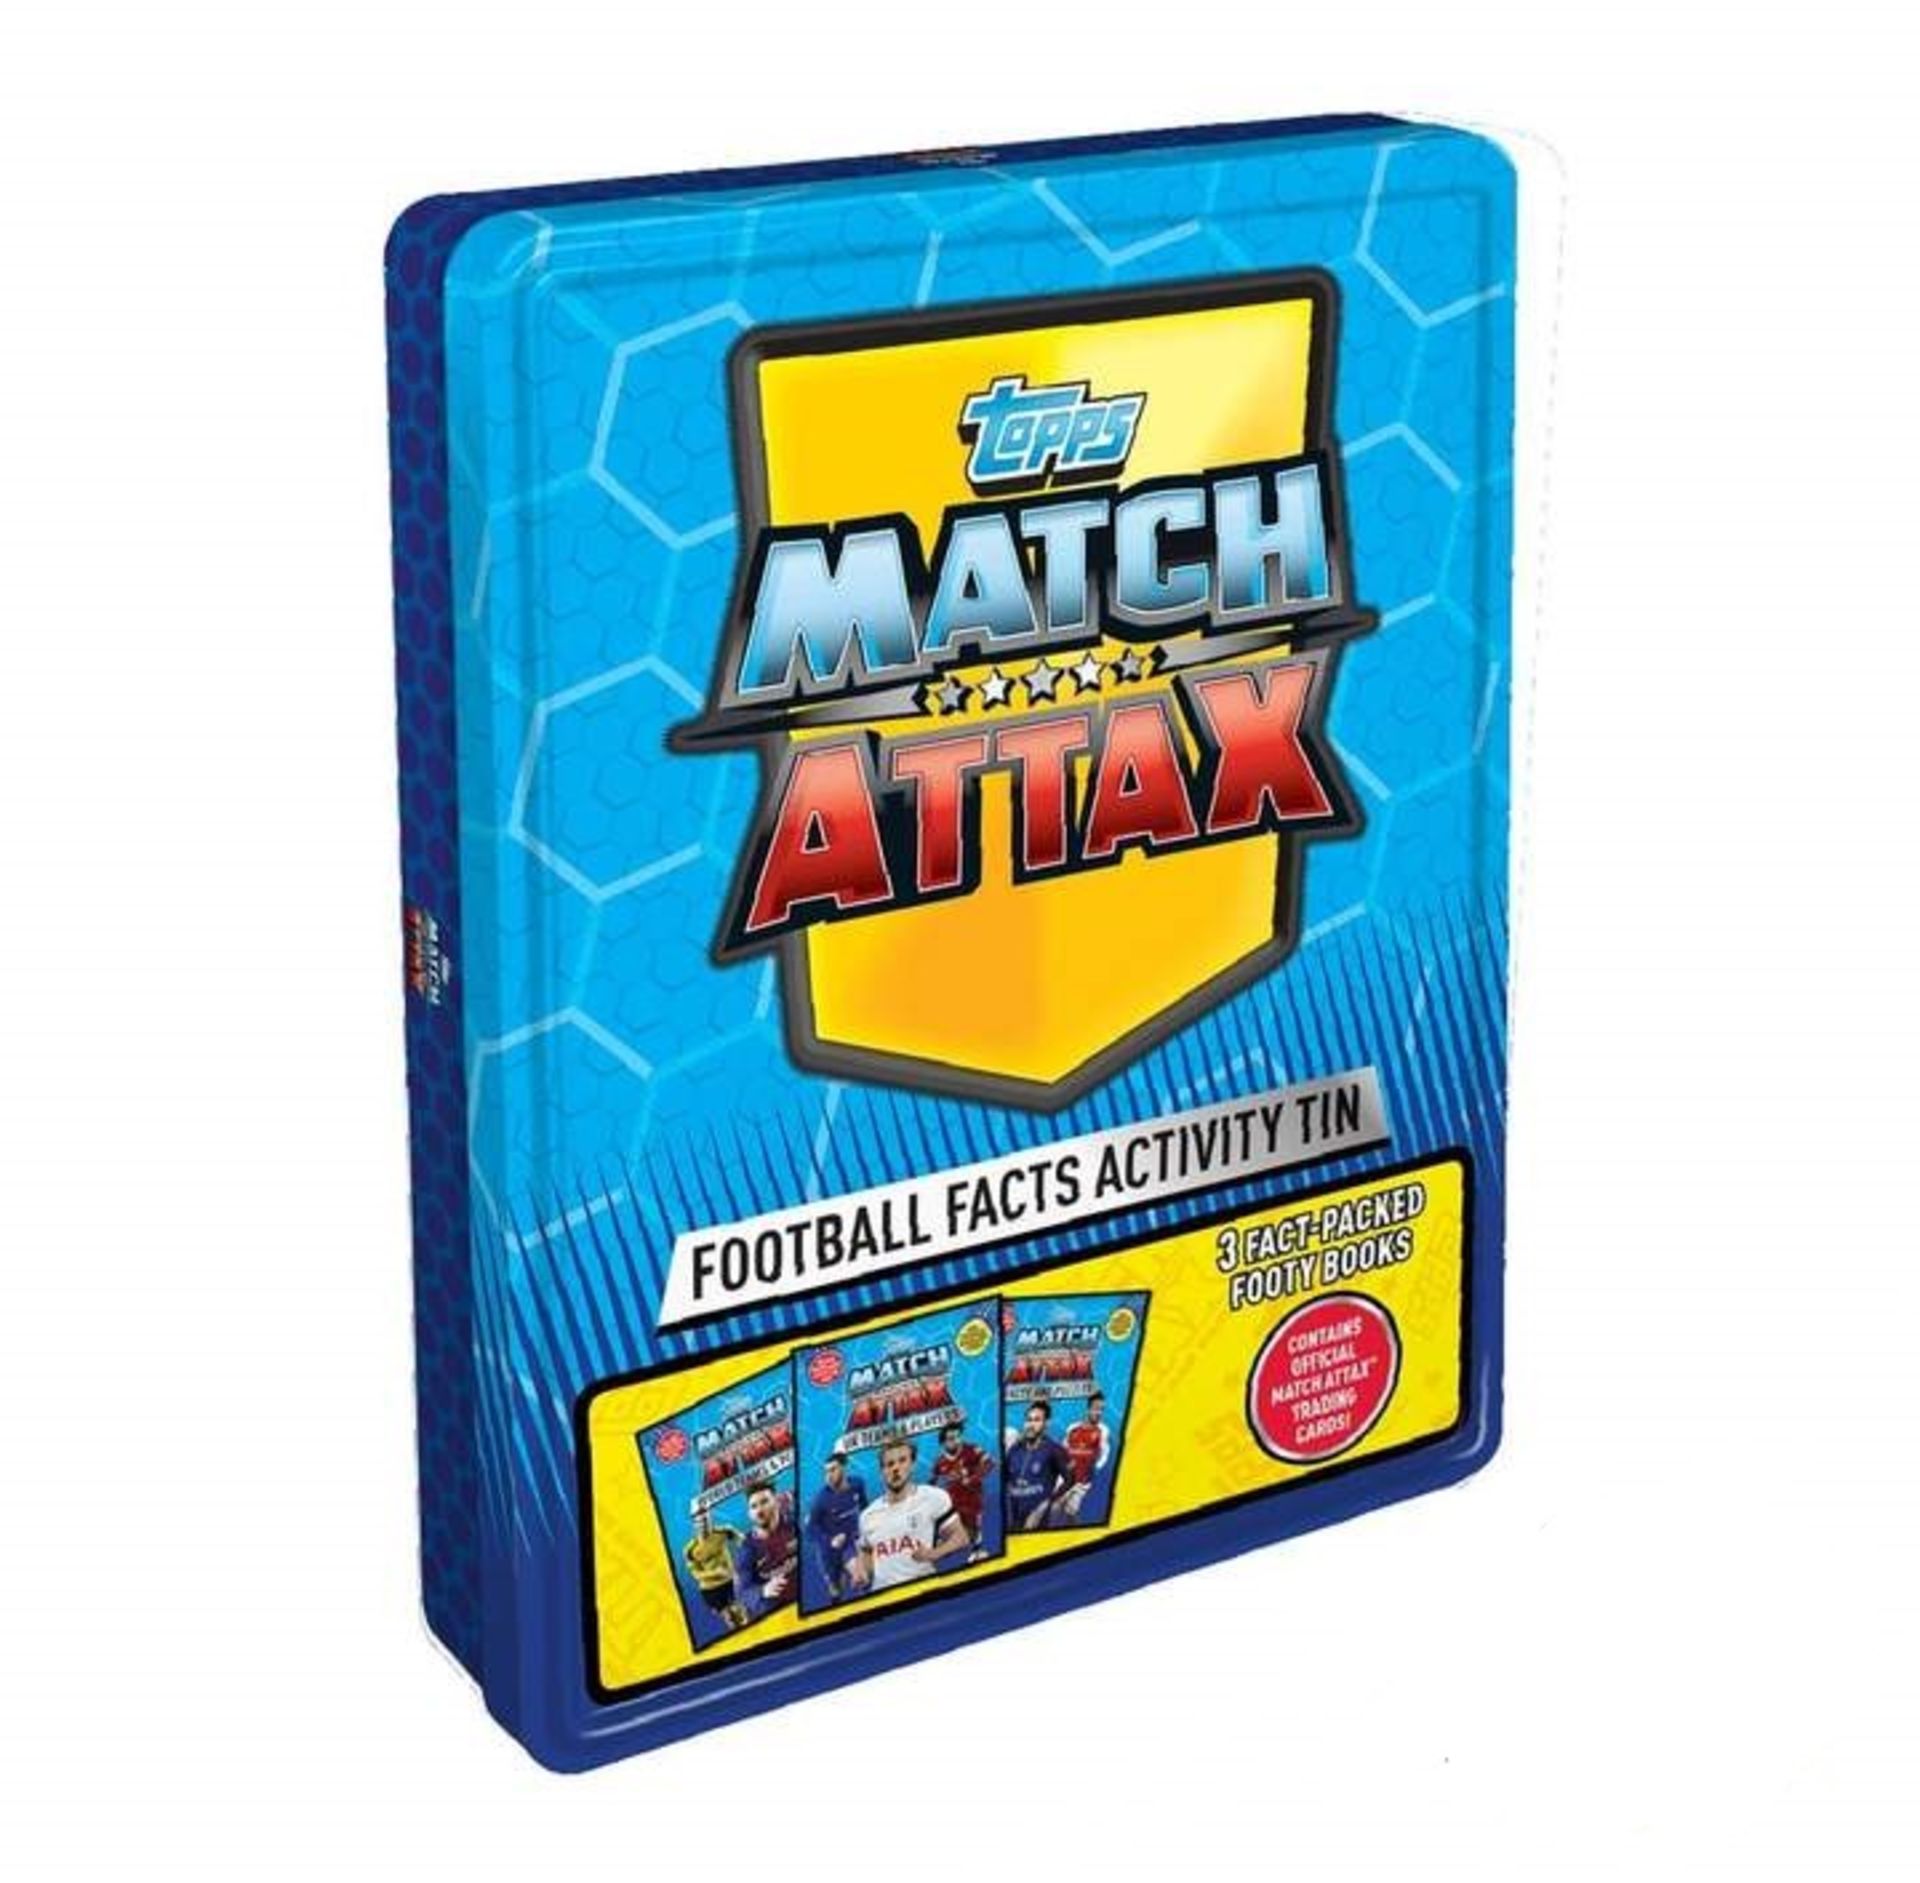 1000 x Topps Match Attax Football Facts Activity Tins - Image 2 of 2